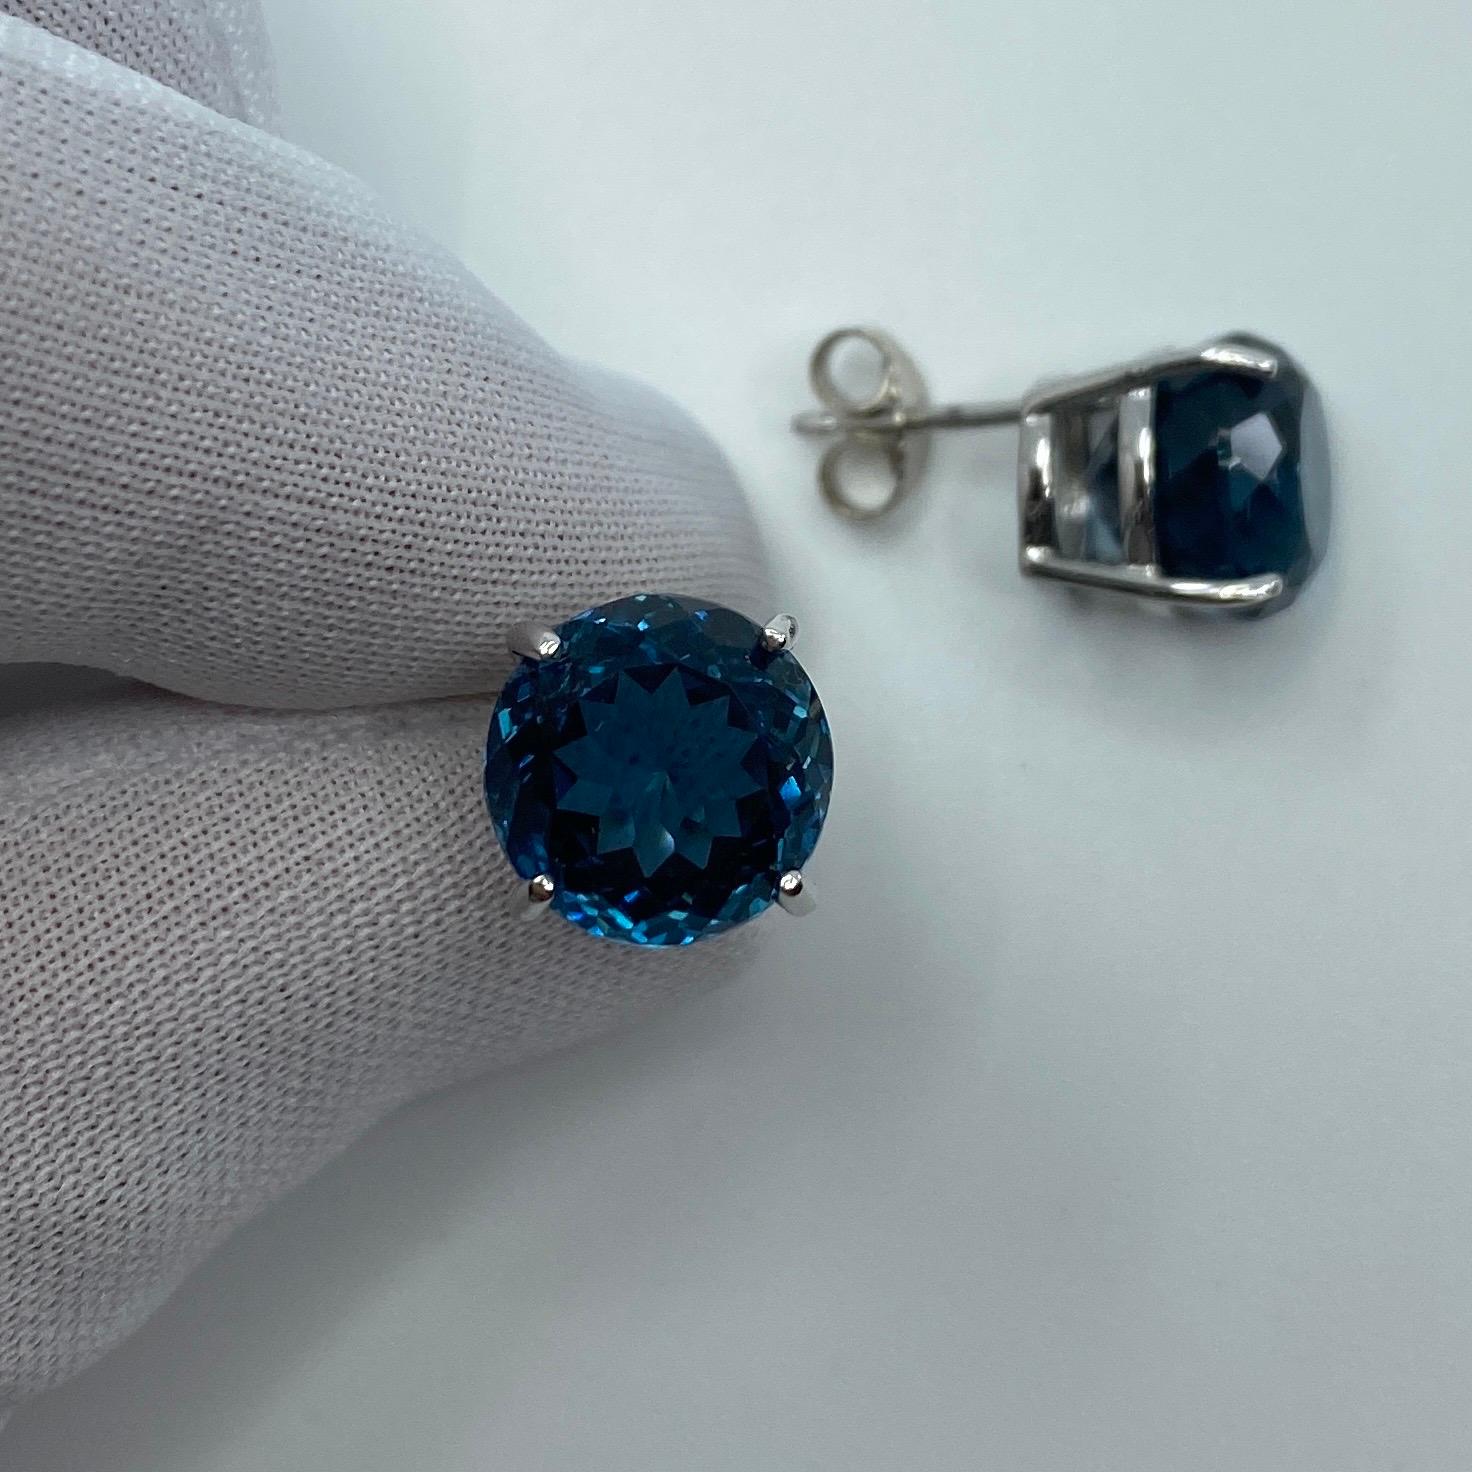 Large Natural London Blue Topaz Oval Cut Yellow Gold Earring Studs.

Beautiful 11mm matching pair of round cut topaz with vivid London blue colour, excellent clarity and an excellent round brilliant cut.
Very large 15.60 total carat weight.

Set in